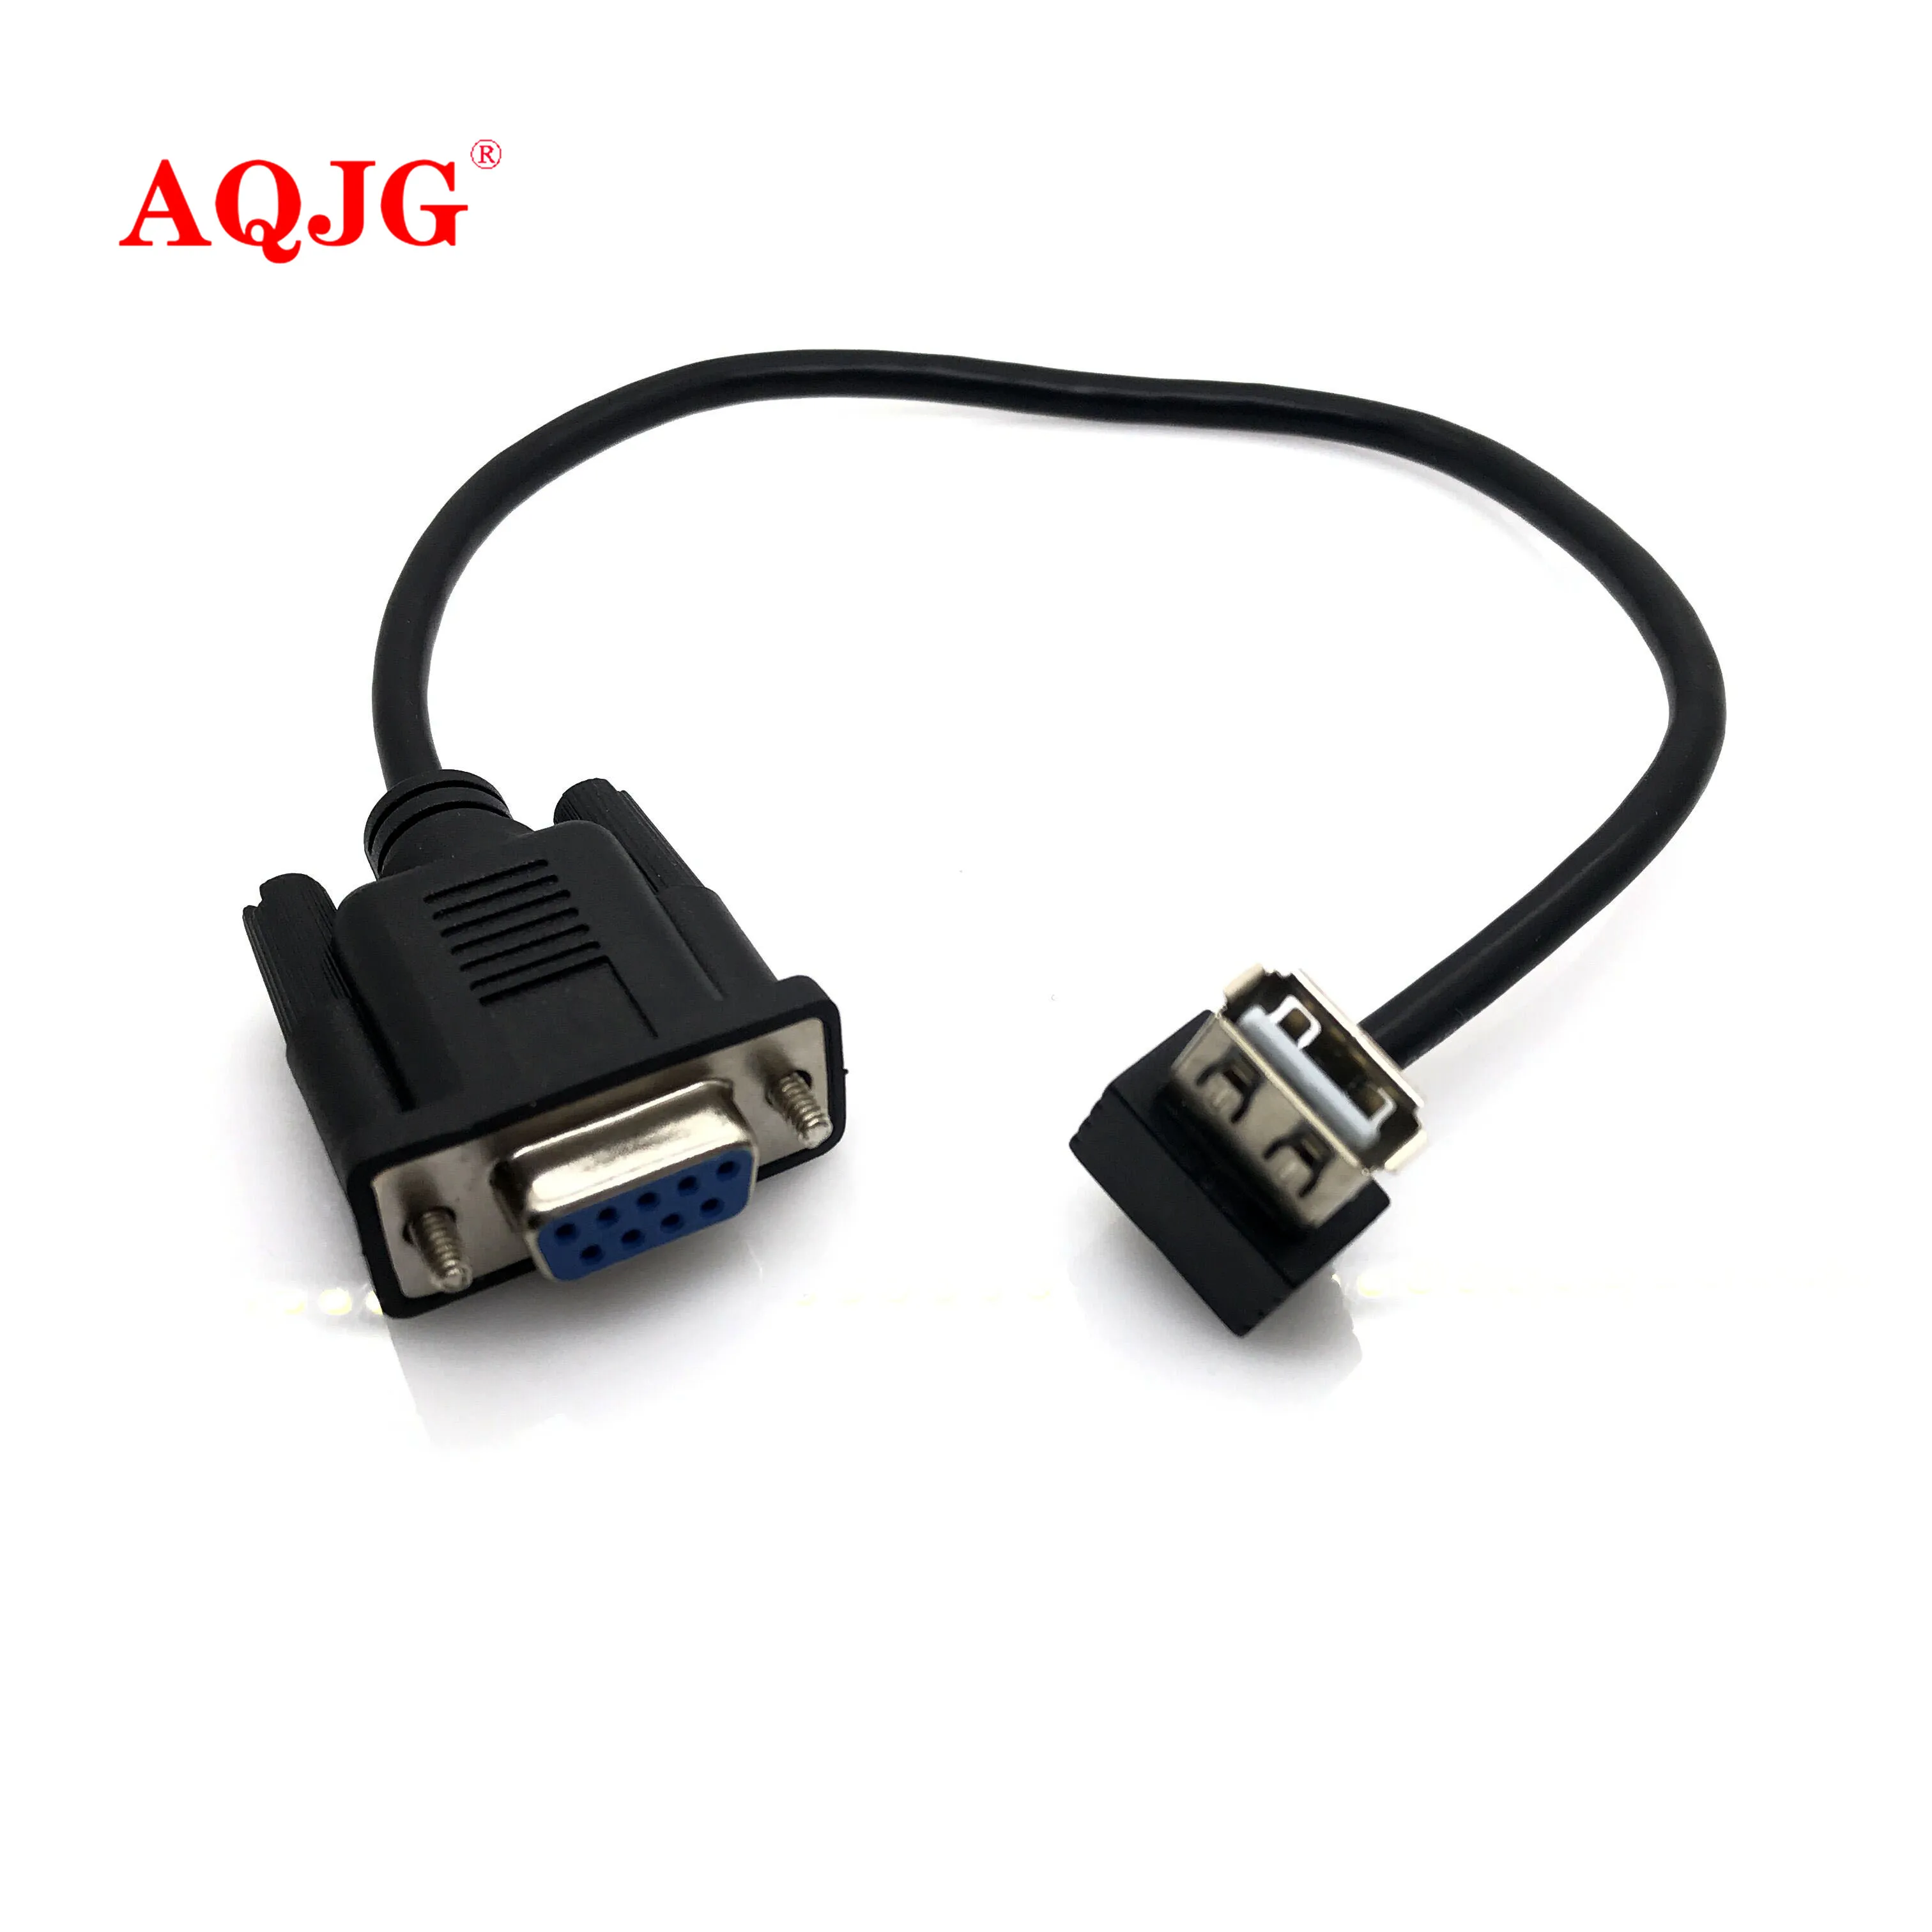 Jeg vasker mit tøj Dam Sportsmand Rs232 Db9 Female To Usb 2.0 A Female Serial Cable Adapter Converter 8" Inch  25cm - Pc Hardware Cables & Adapters - AliExpress